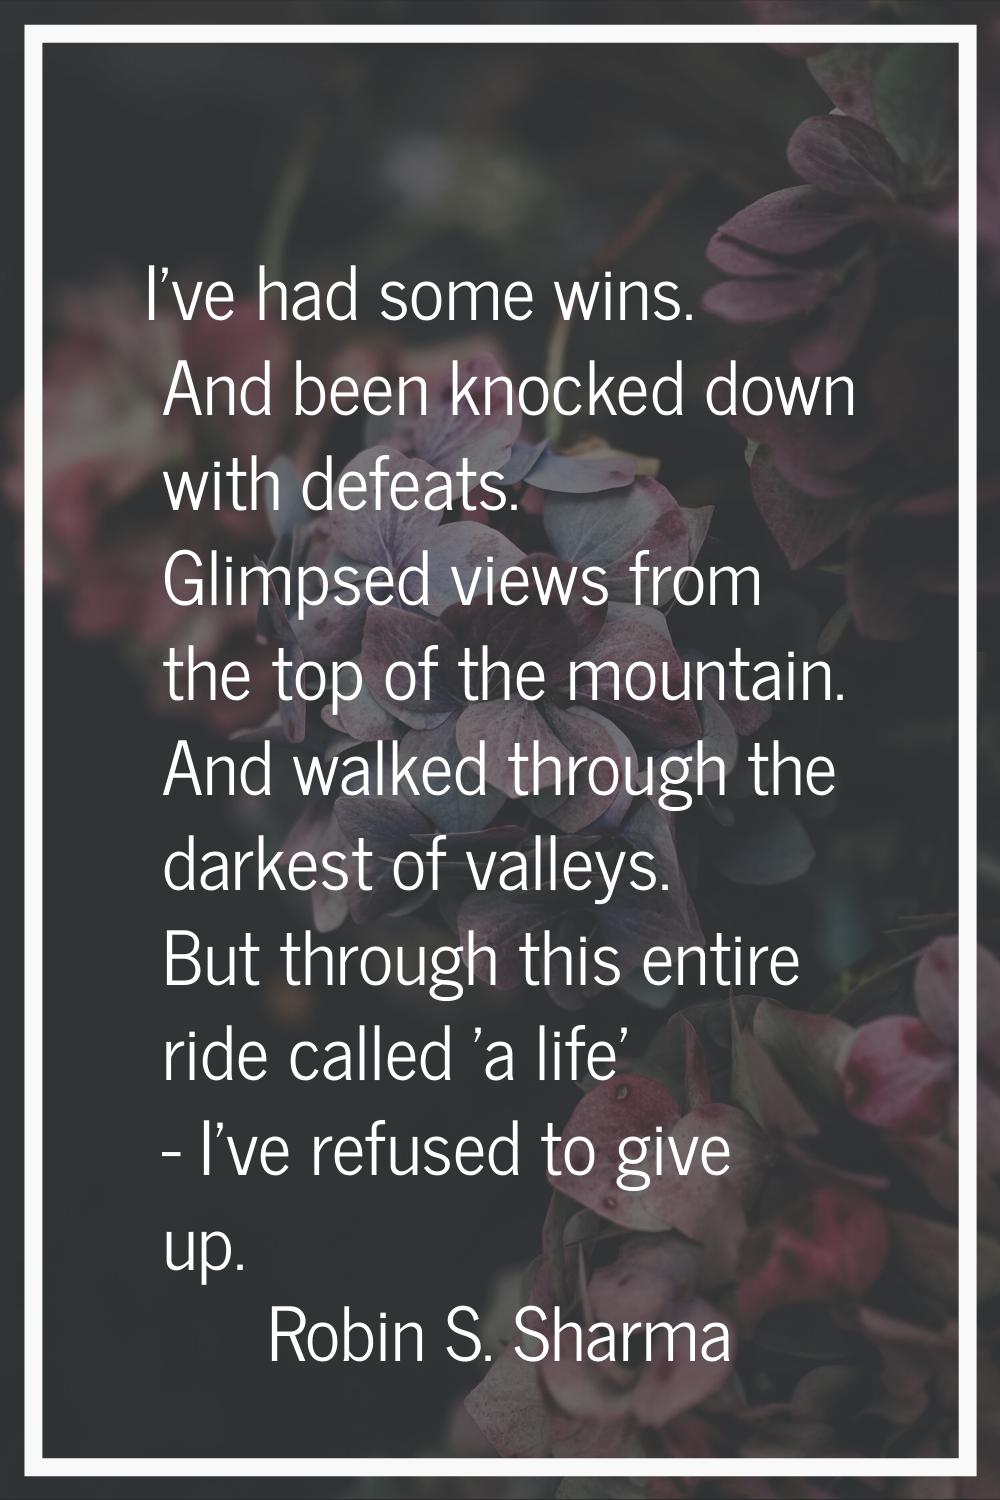 I've had some wins. And been knocked down with defeats. Glimpsed views from the top of the mountain